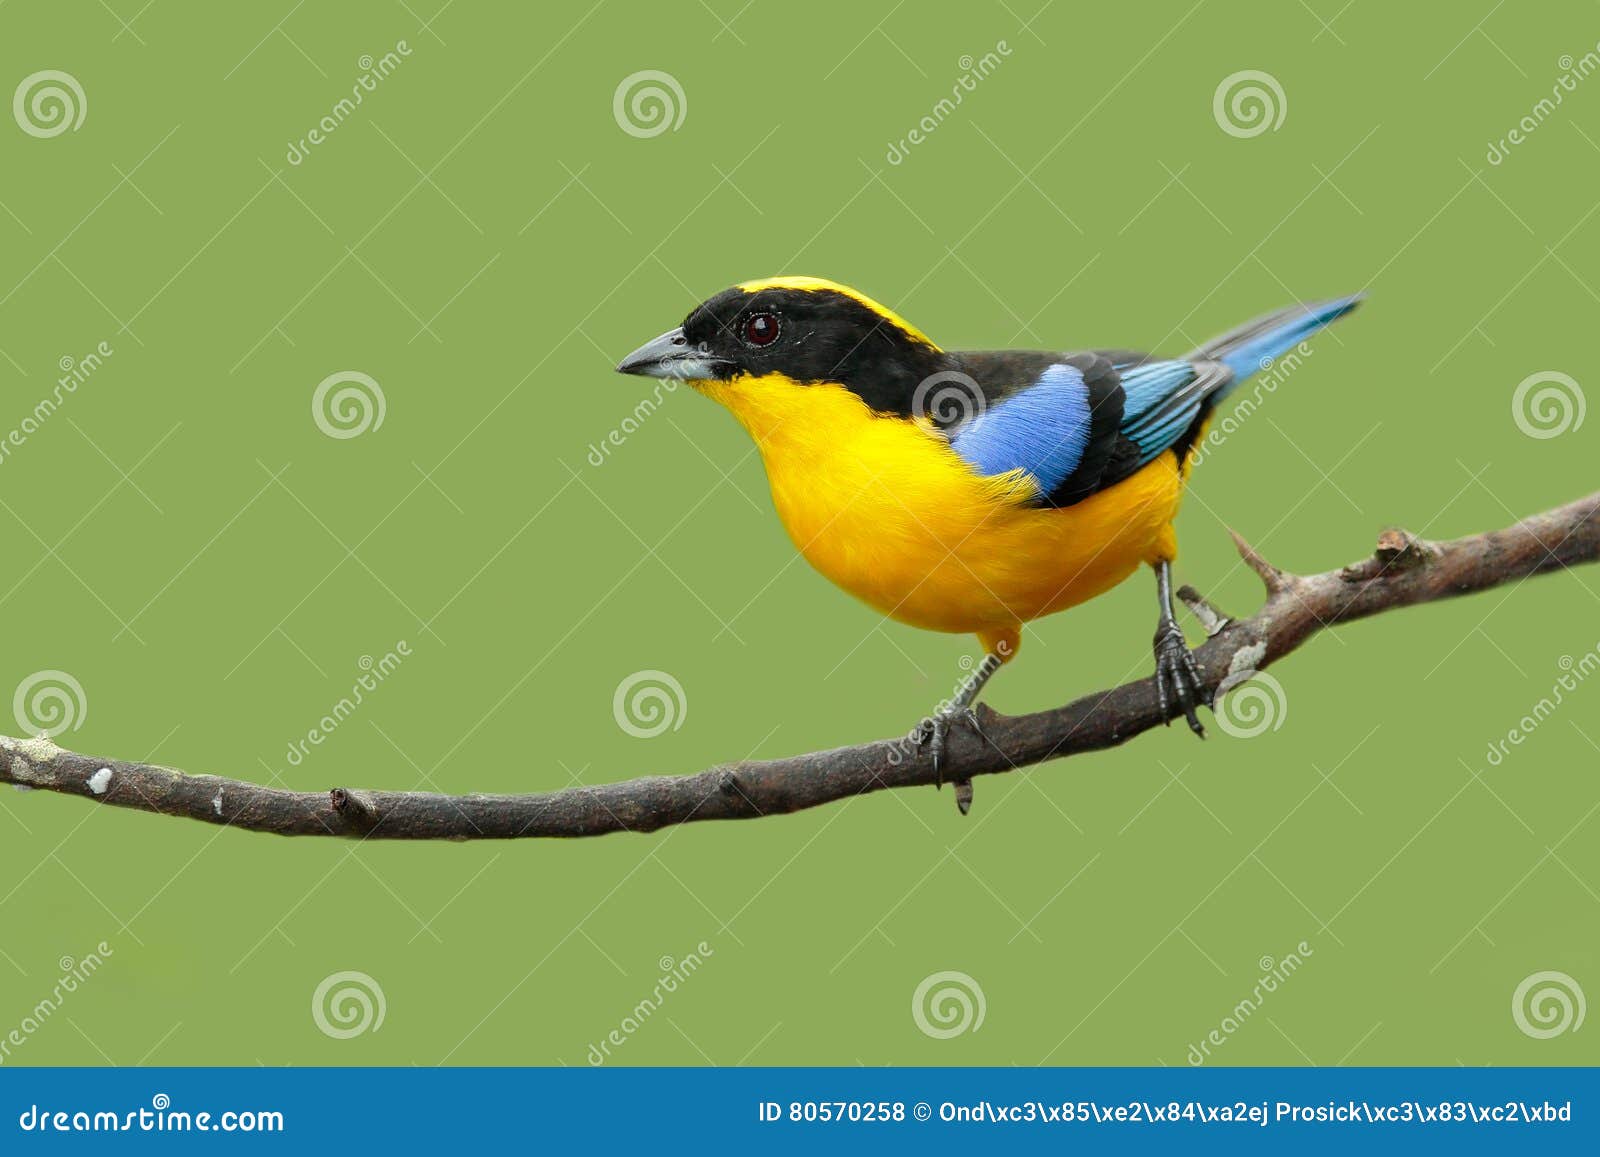 blue-winged mountain-tanager, anisognathus somptuosus, santa marta, colombia. yellow, black and blue mountain tanager, sitting on